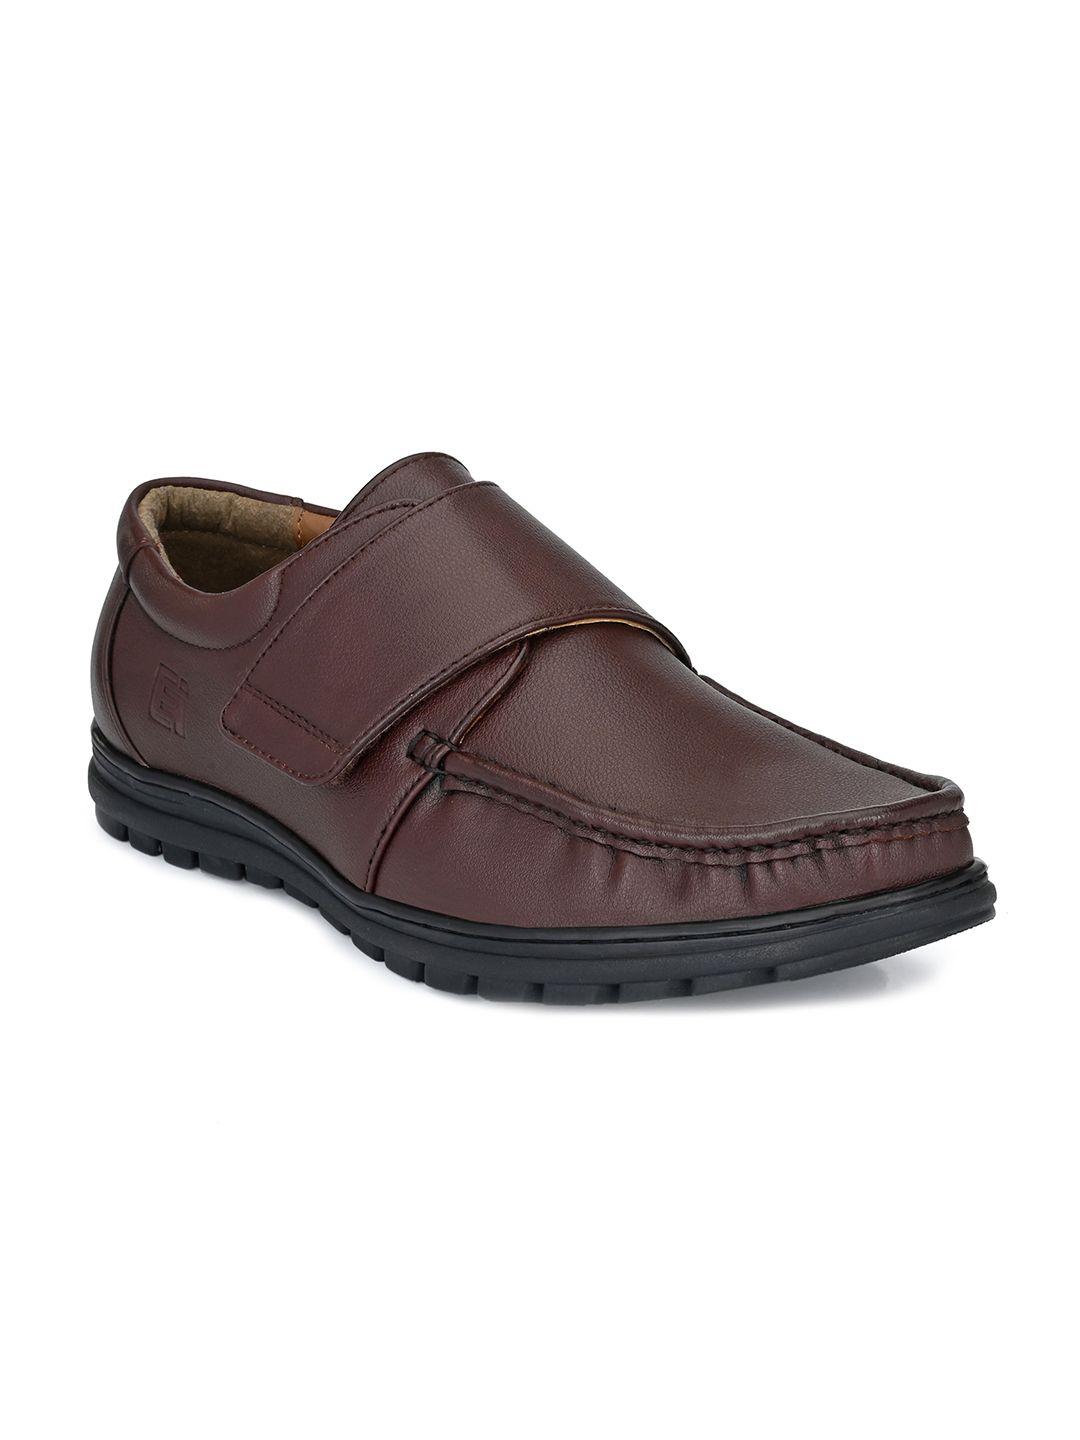 eego italy men slip-on formal shoes